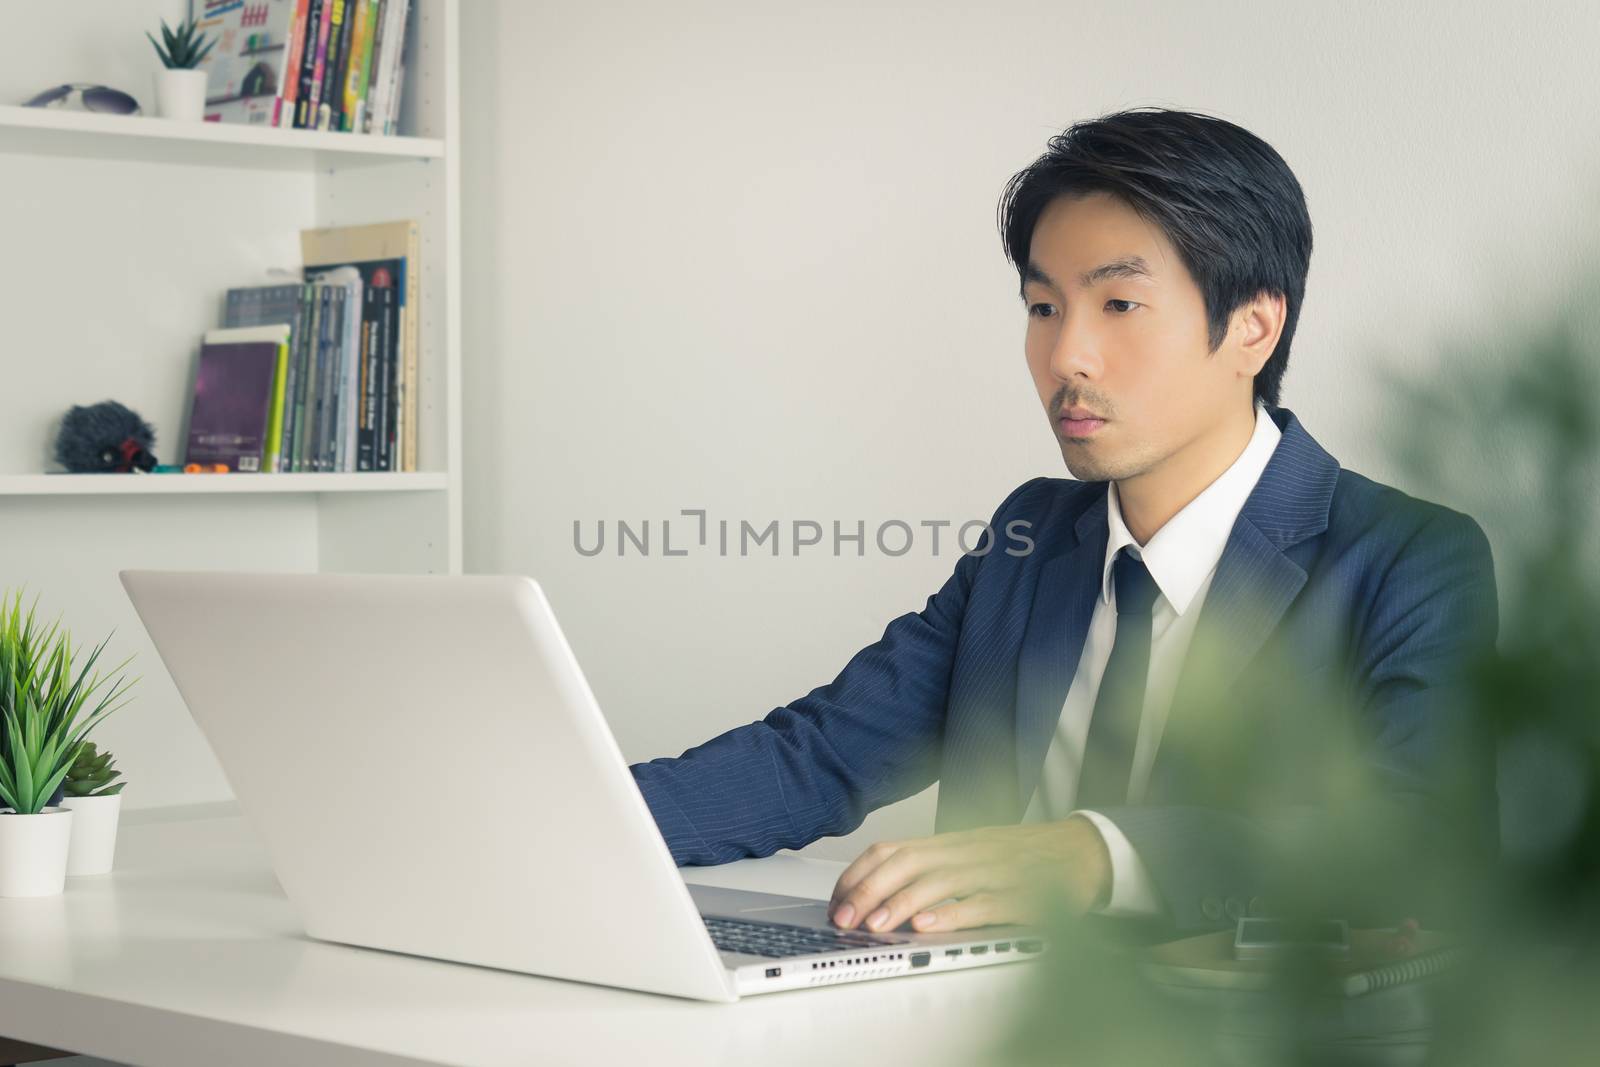 Asian Businessman In front of Laptop Monitor and Tree Foreground. Asian businessman working in office